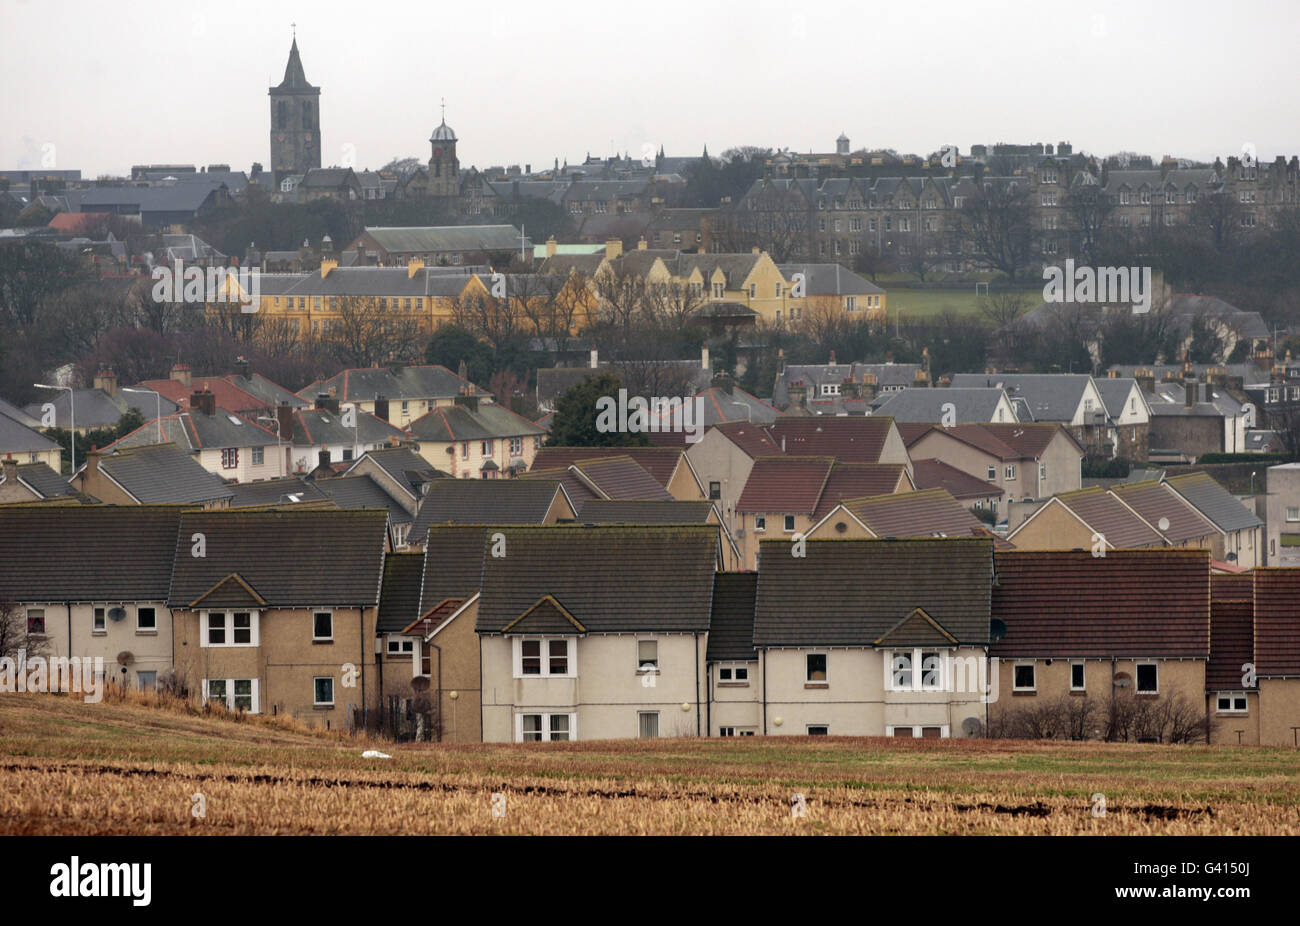 A general view of St Andrews, Scotland. Prince William and Kate Middleton met at St Andrews University where they both studied. Stock Photo